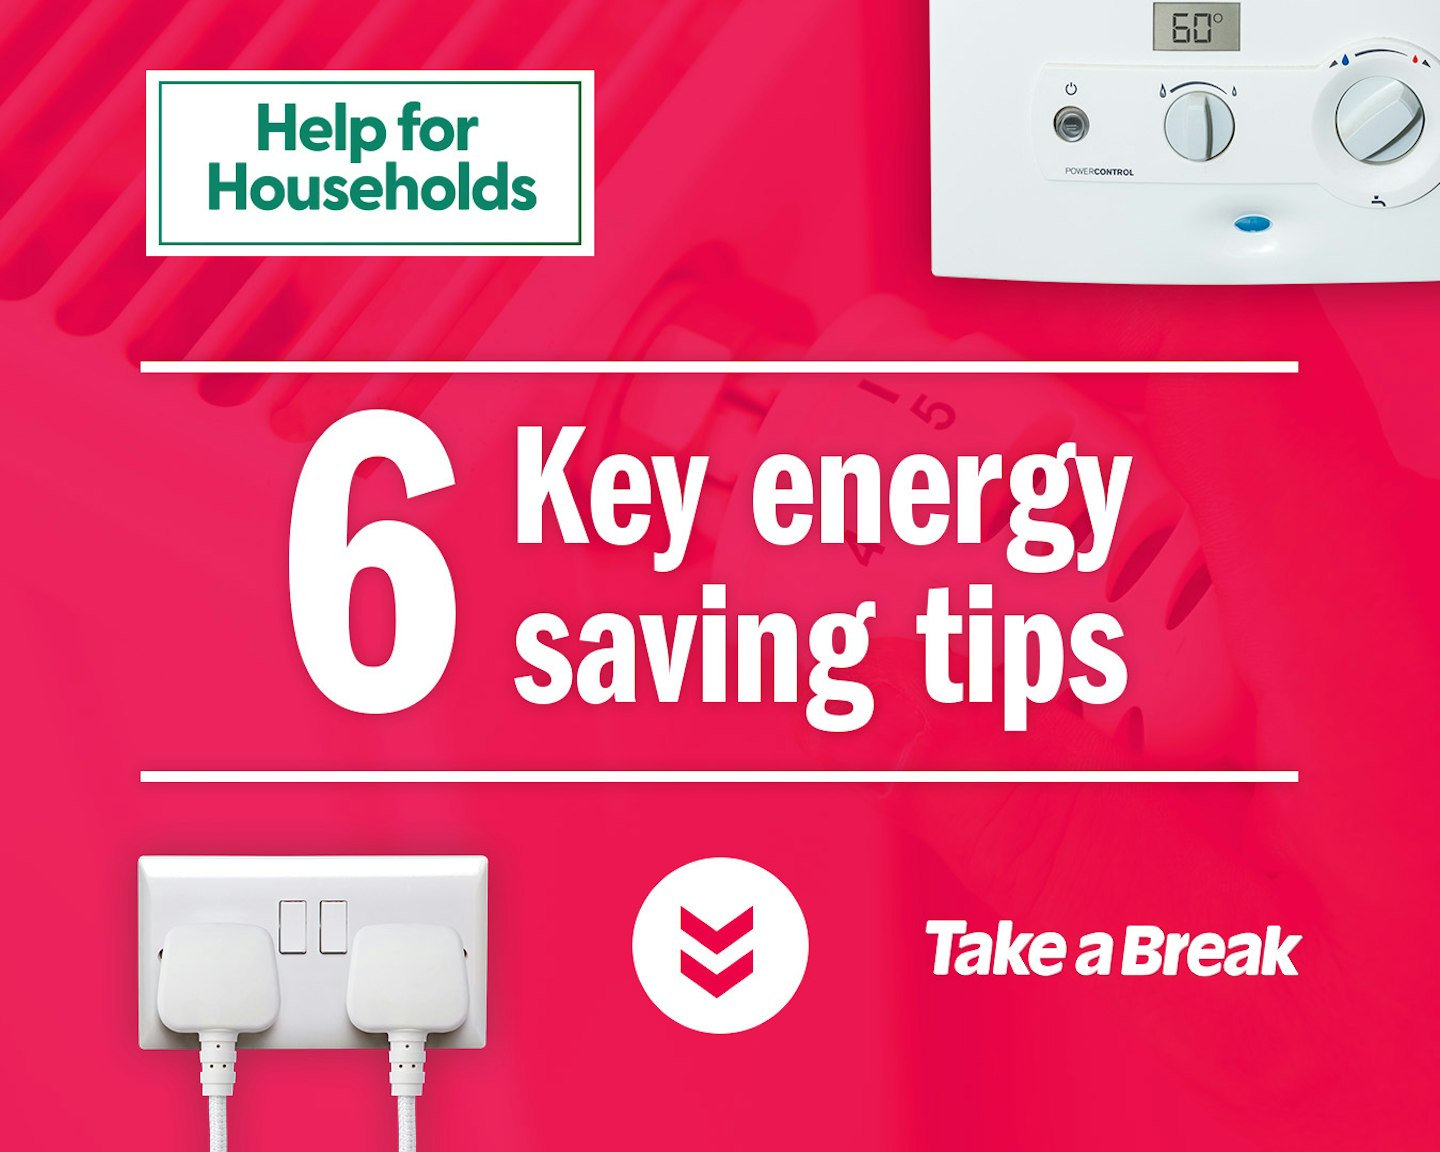 Graphic about energy saving tips